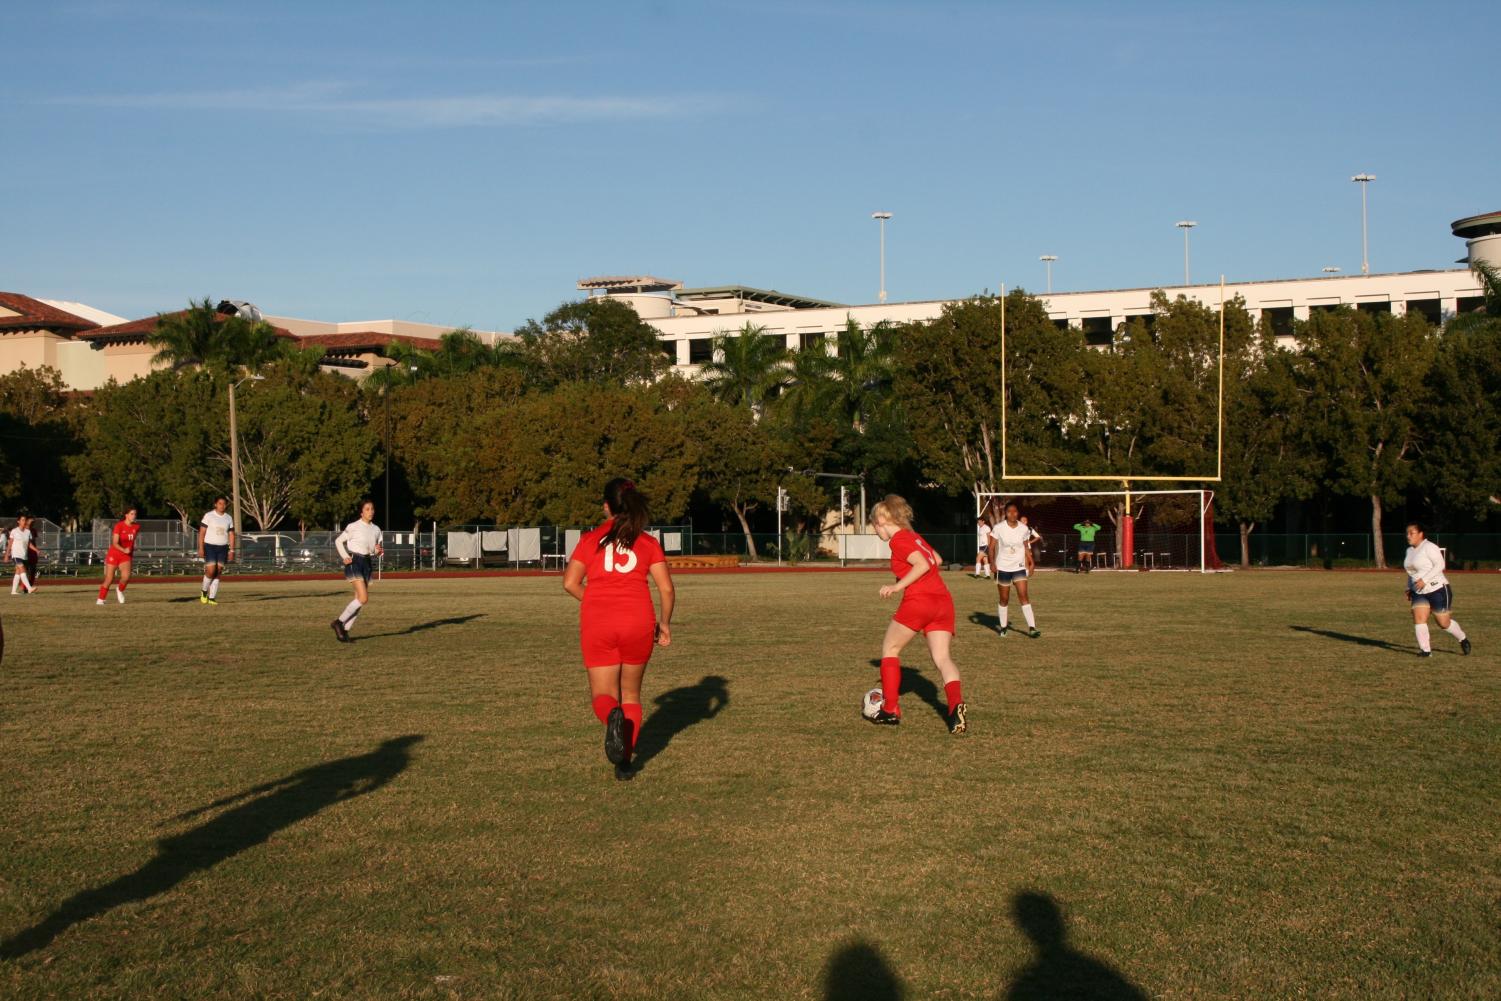 Gables+girls+soccer+team+defeat+Miami+High+8-0+on+home+field